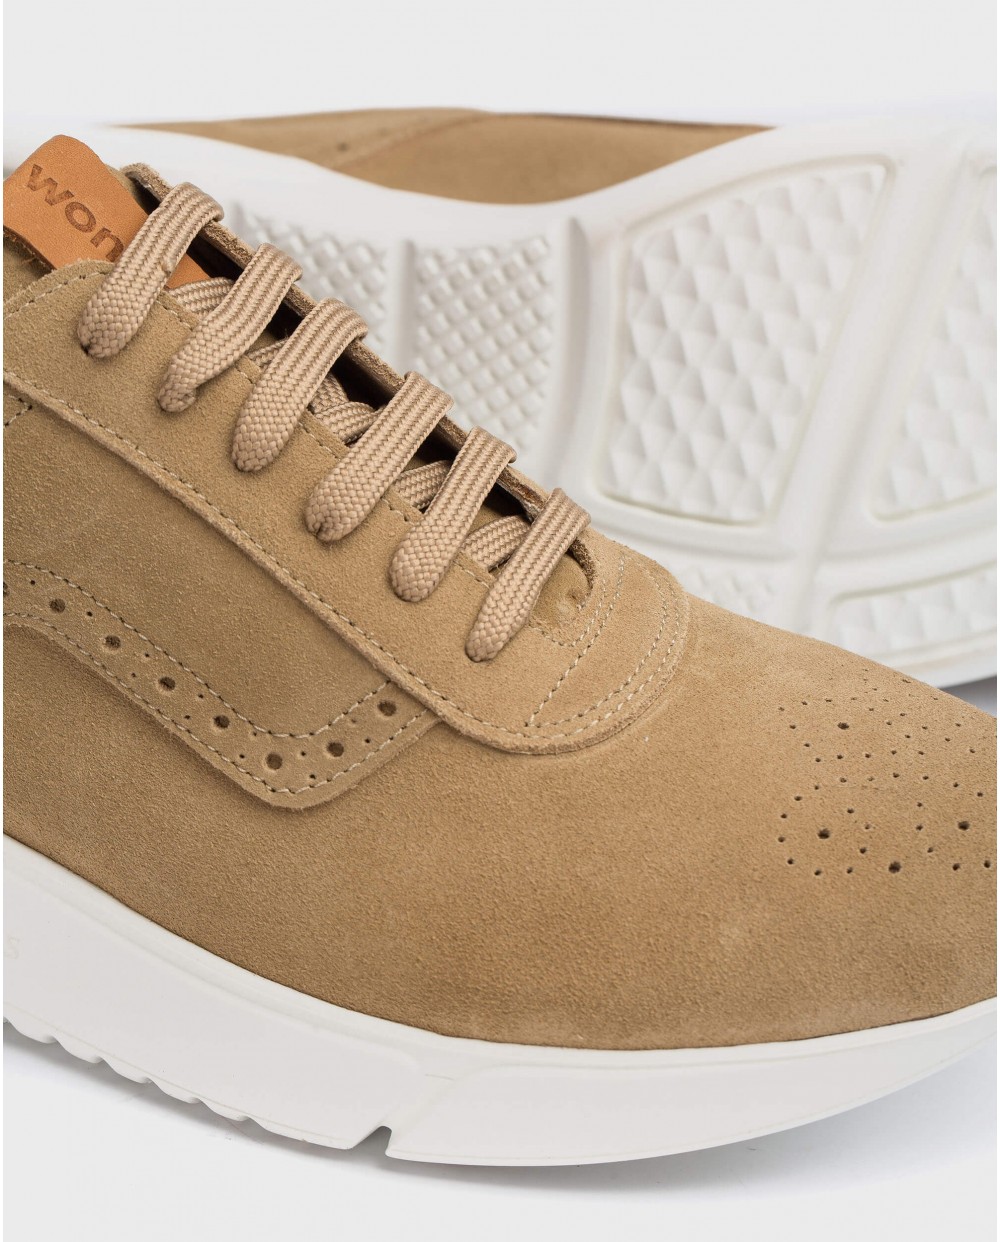 Wonders-Winter Outlet-Perforated leather sneaker